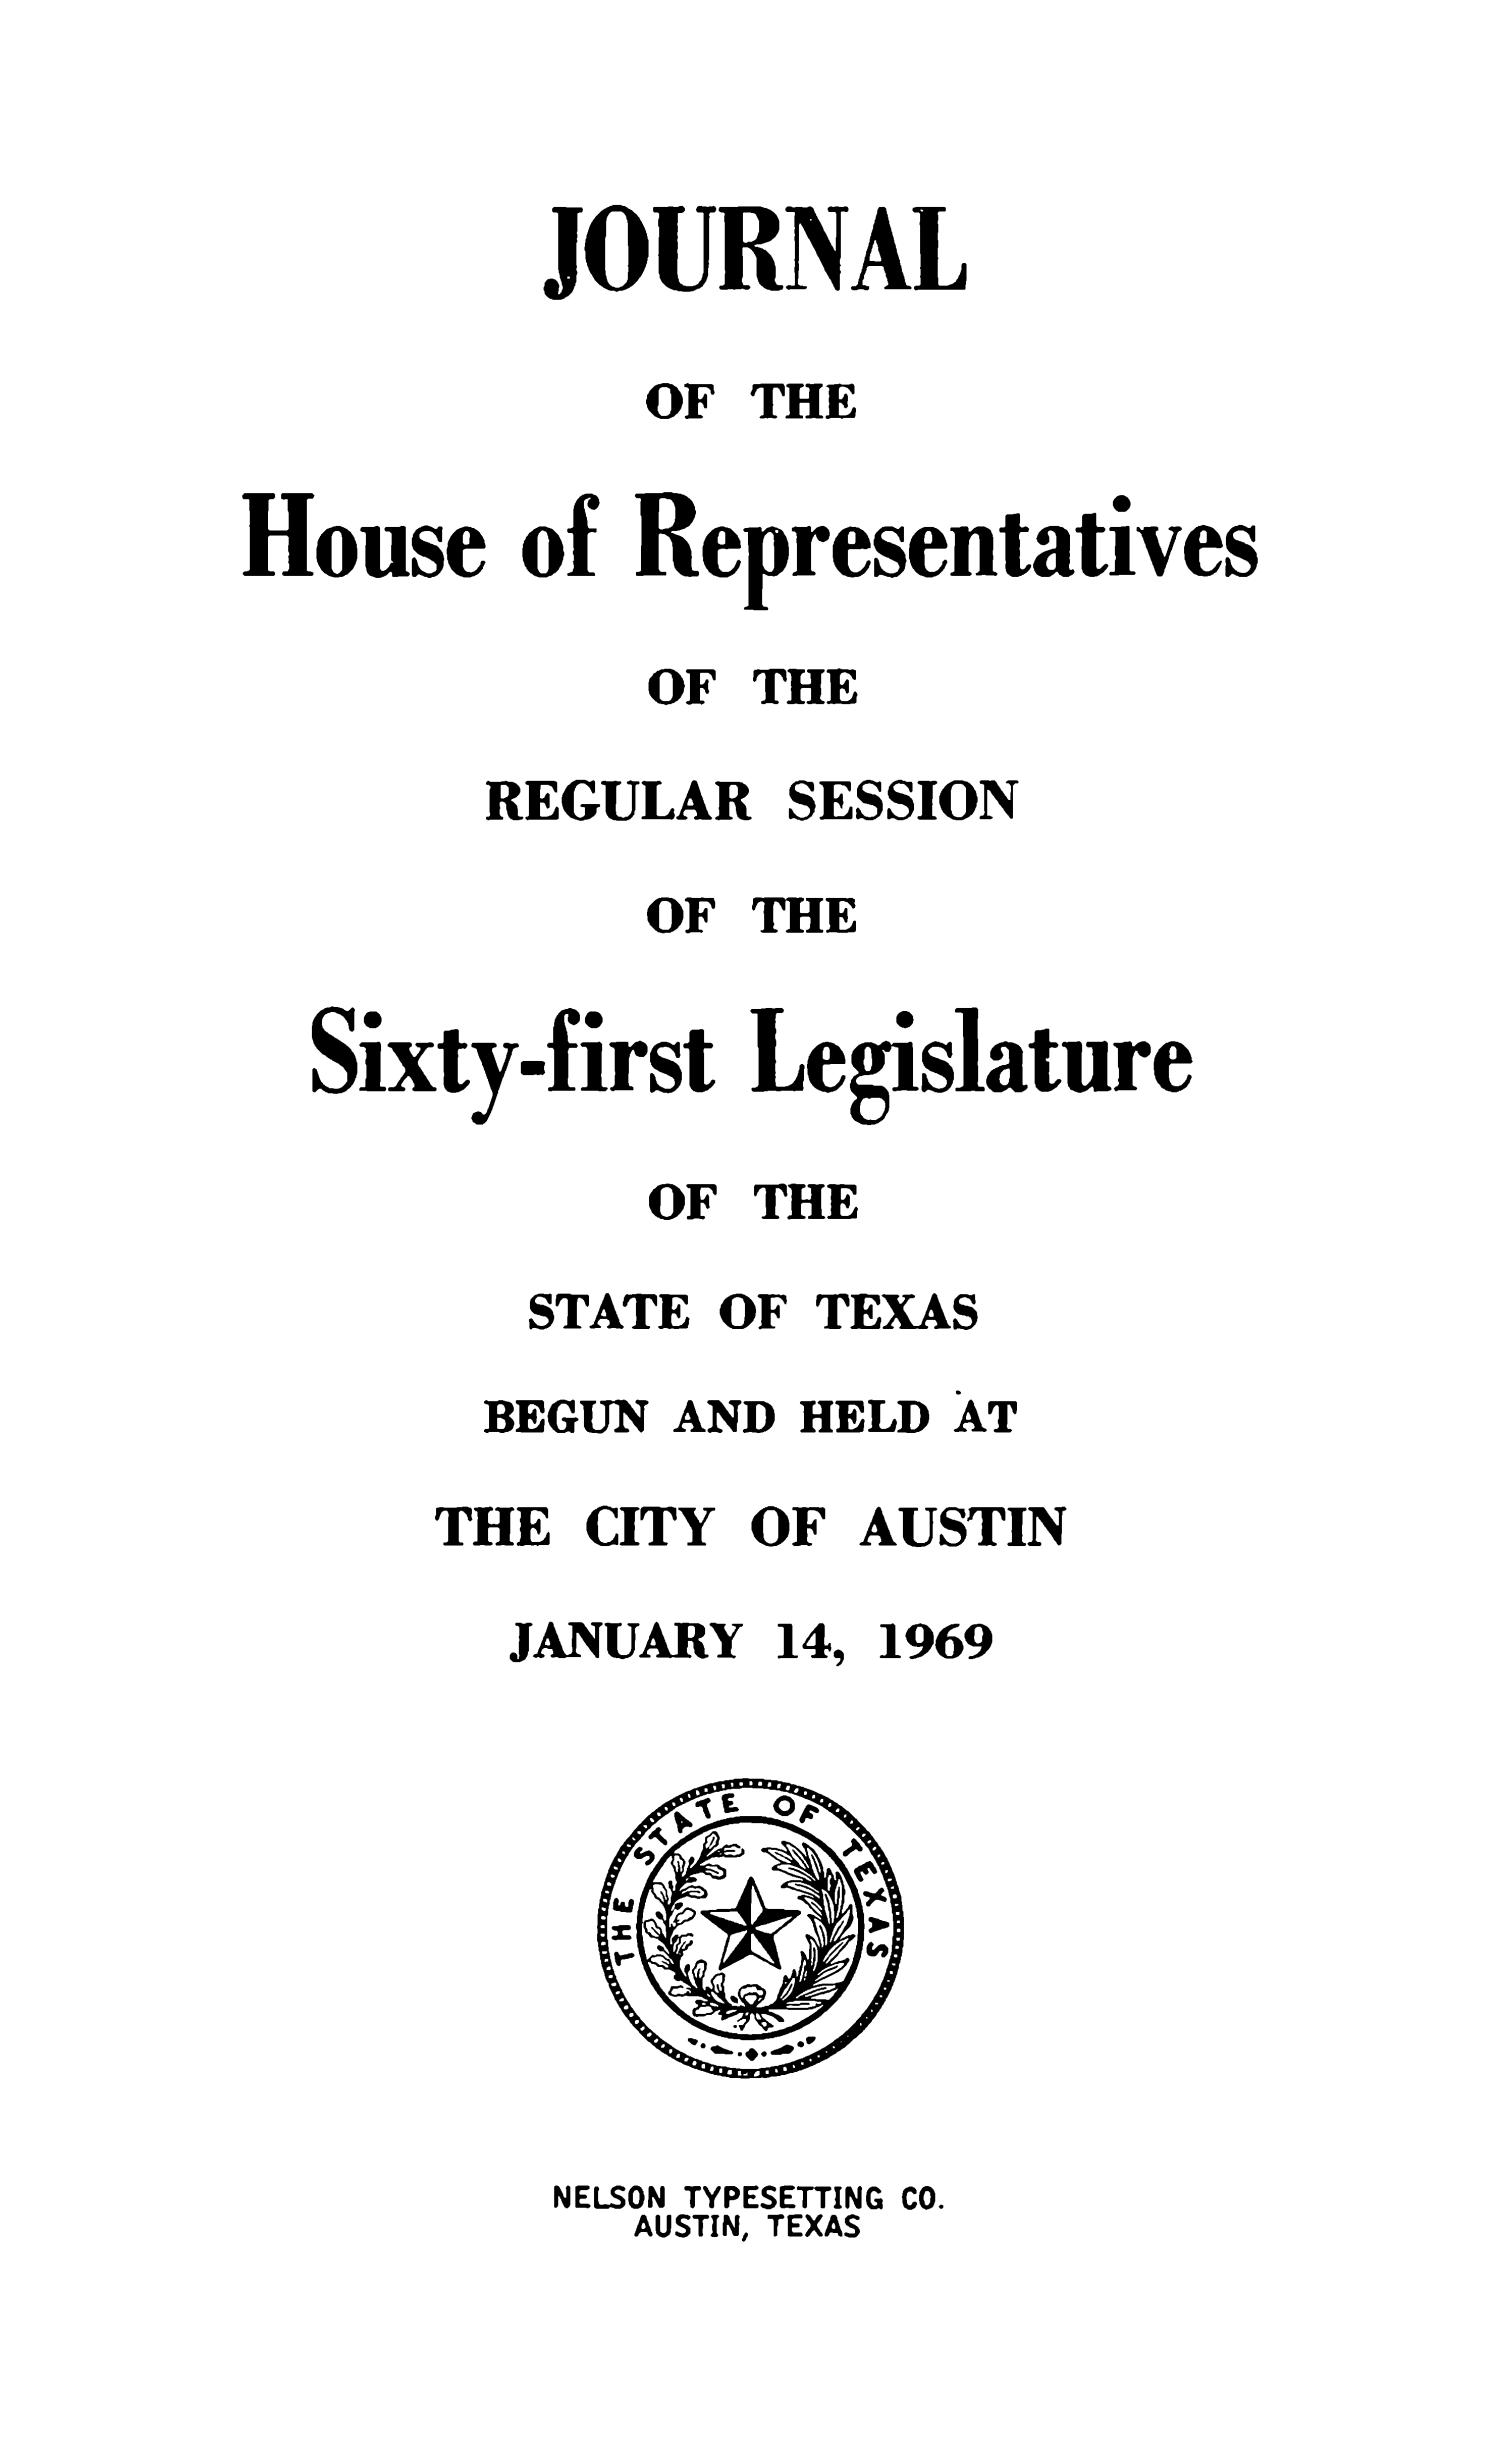 Journal of the House of Representatives of the Regular Session of the Sixty-First Legislature of the State of Texas, Volume 1
                                                
                                                    Title Page
                                                